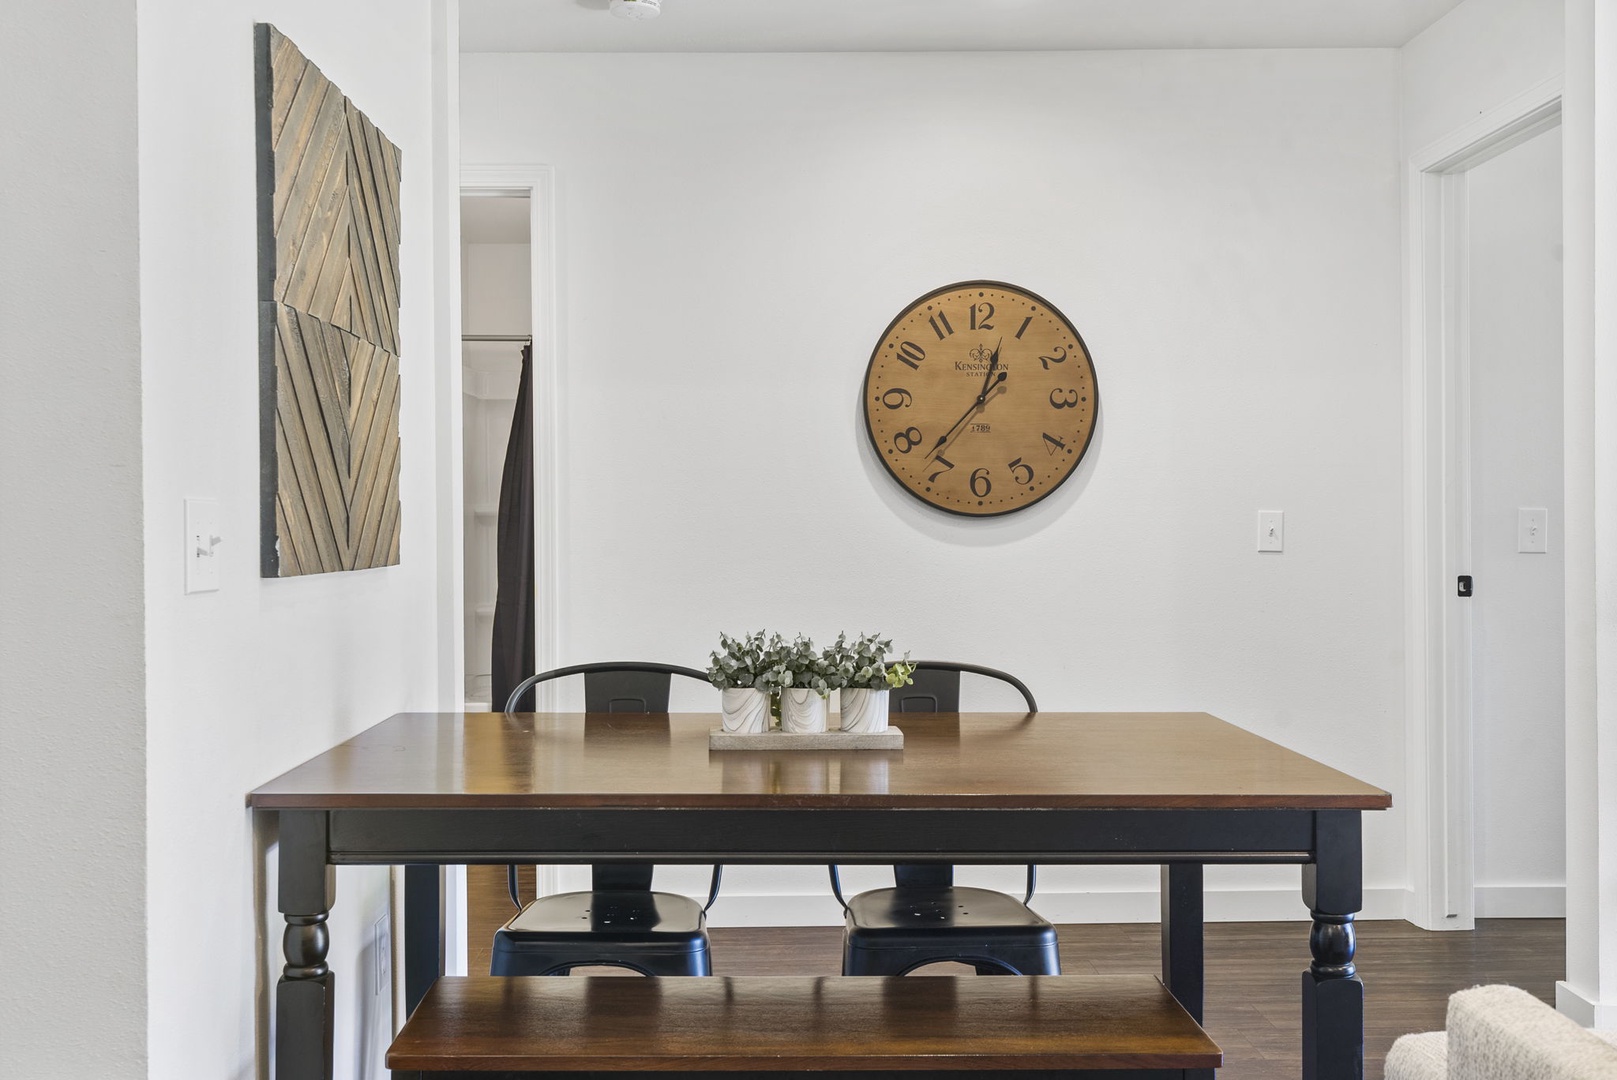 Gather for meals together at the dining table, with space for 4